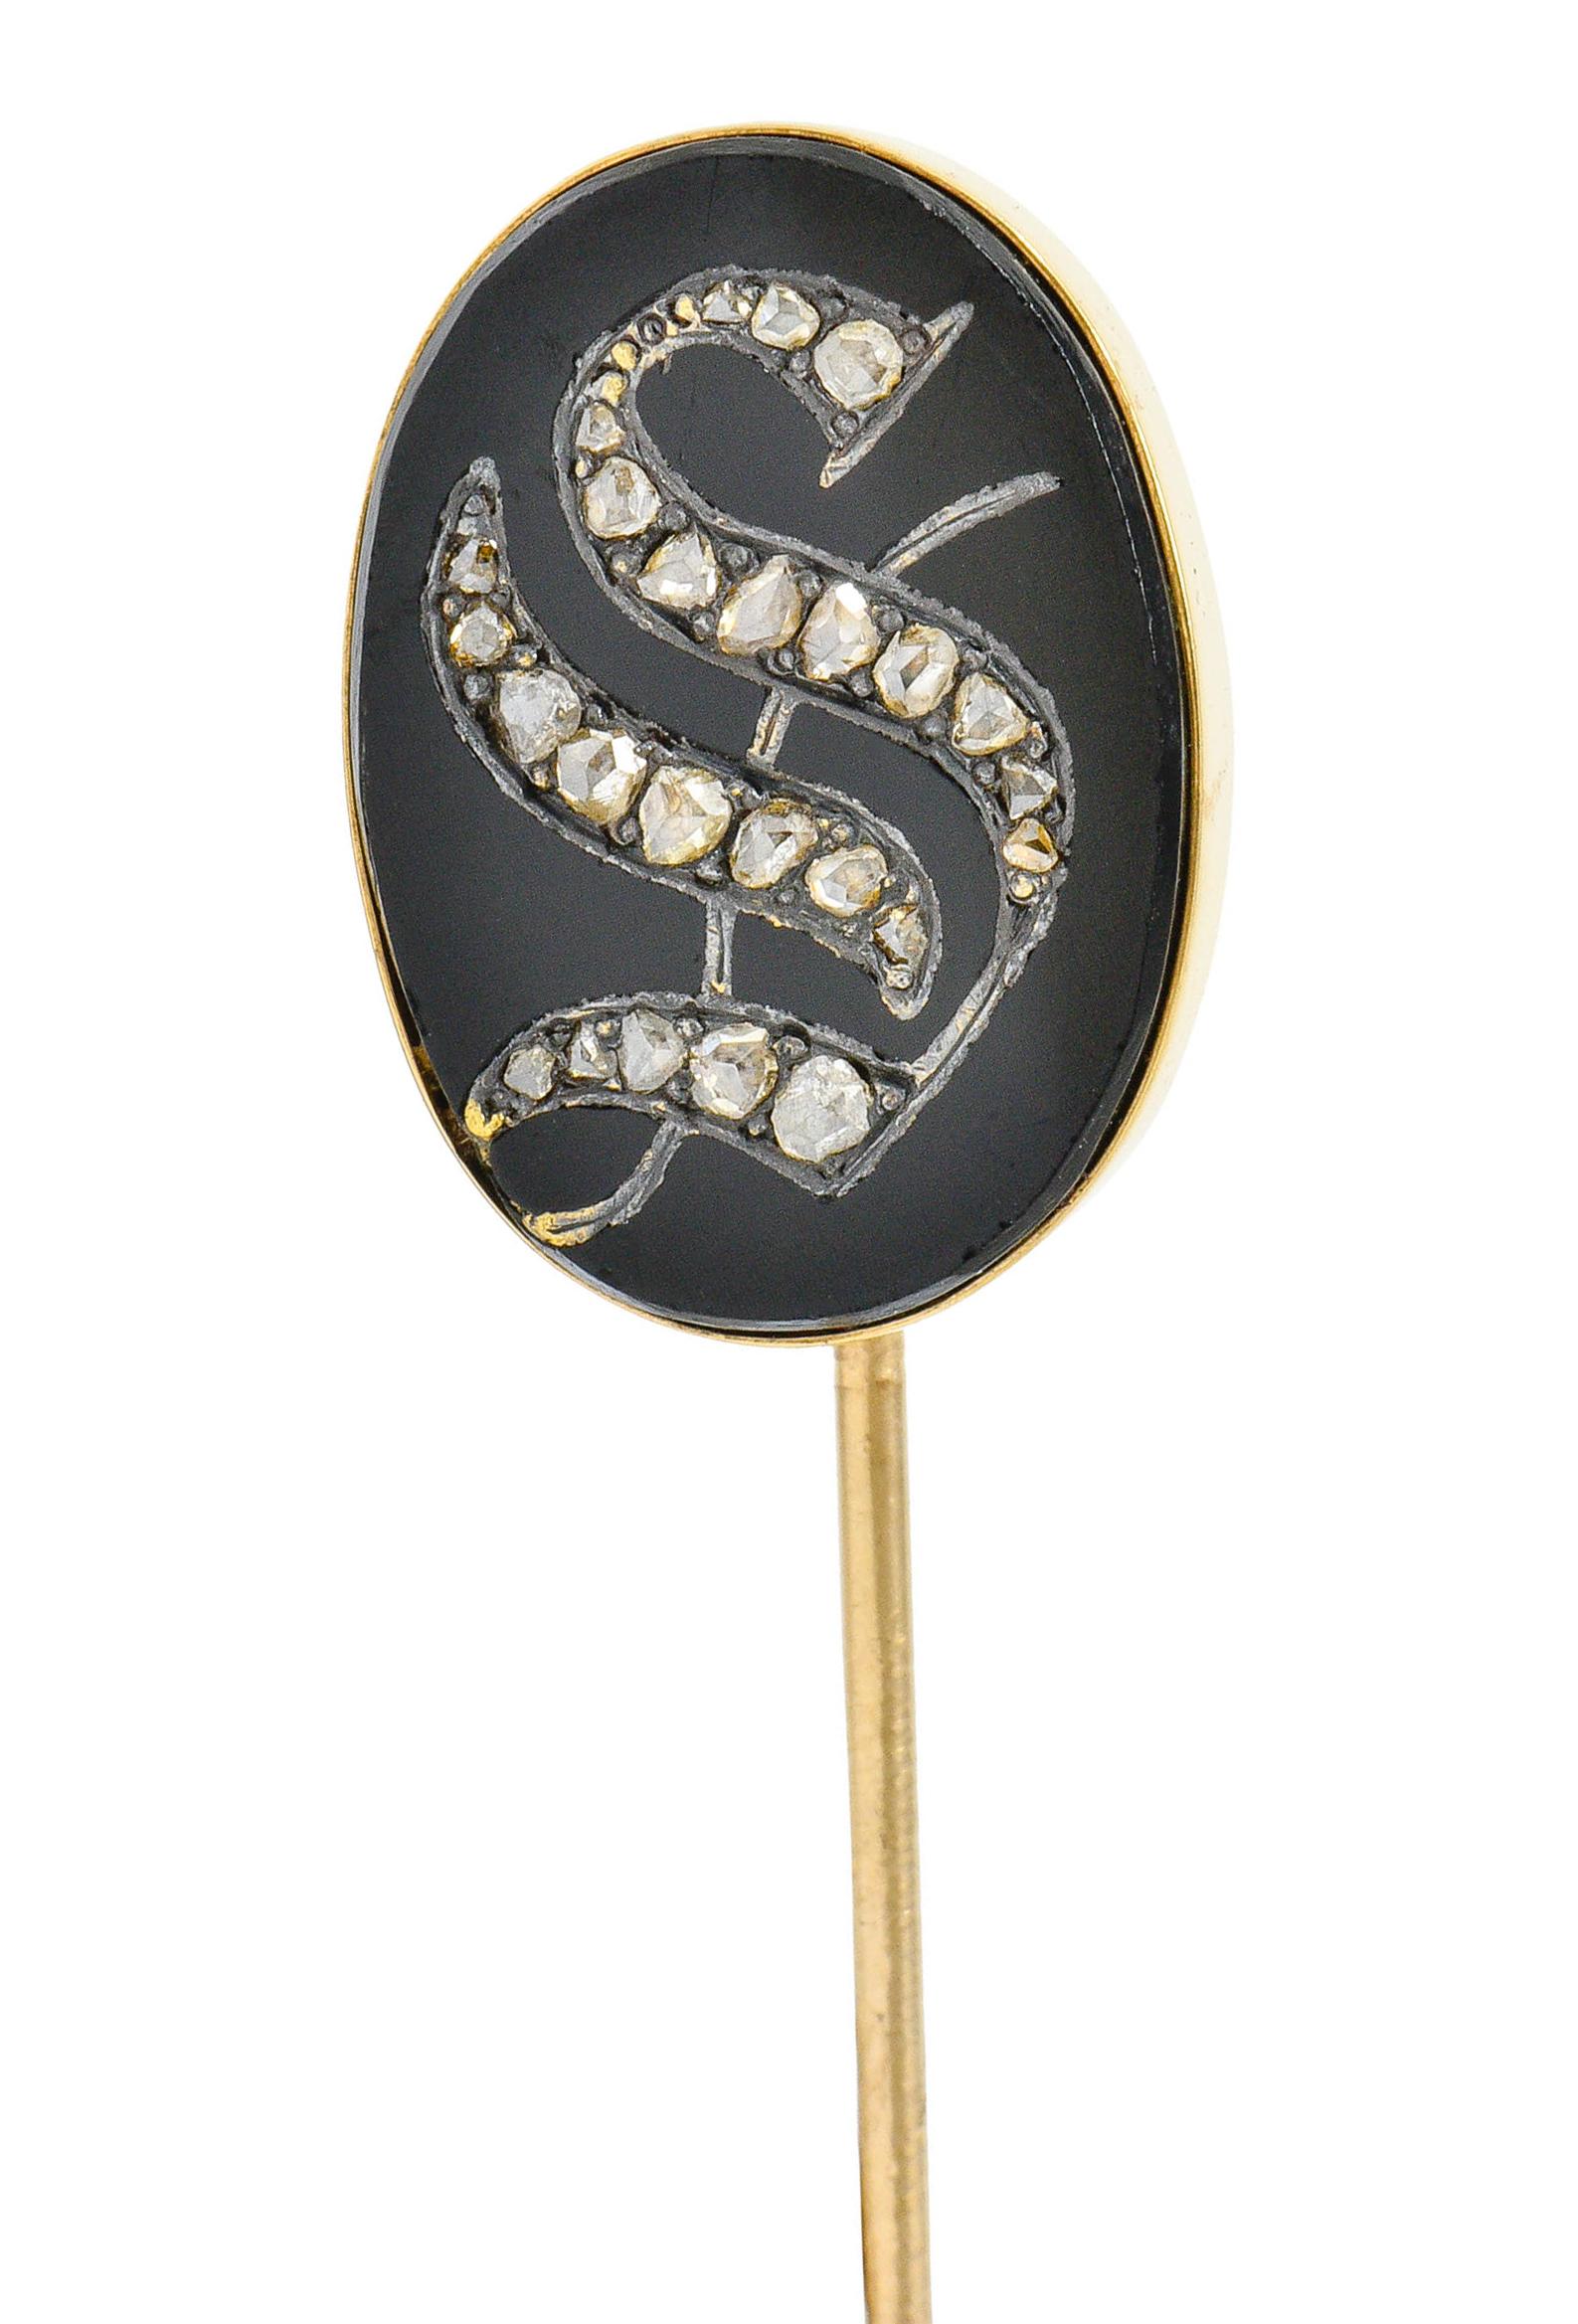 Centering an oval tablet of polished black onyx measuring approximately 18.5x 13.0 mm

Deeply carved to depict a stylized monogramed 'S' accented by rose cut diamonds

Bezel set in a polished gold surround

Tested as 14 karat gold

Circa: